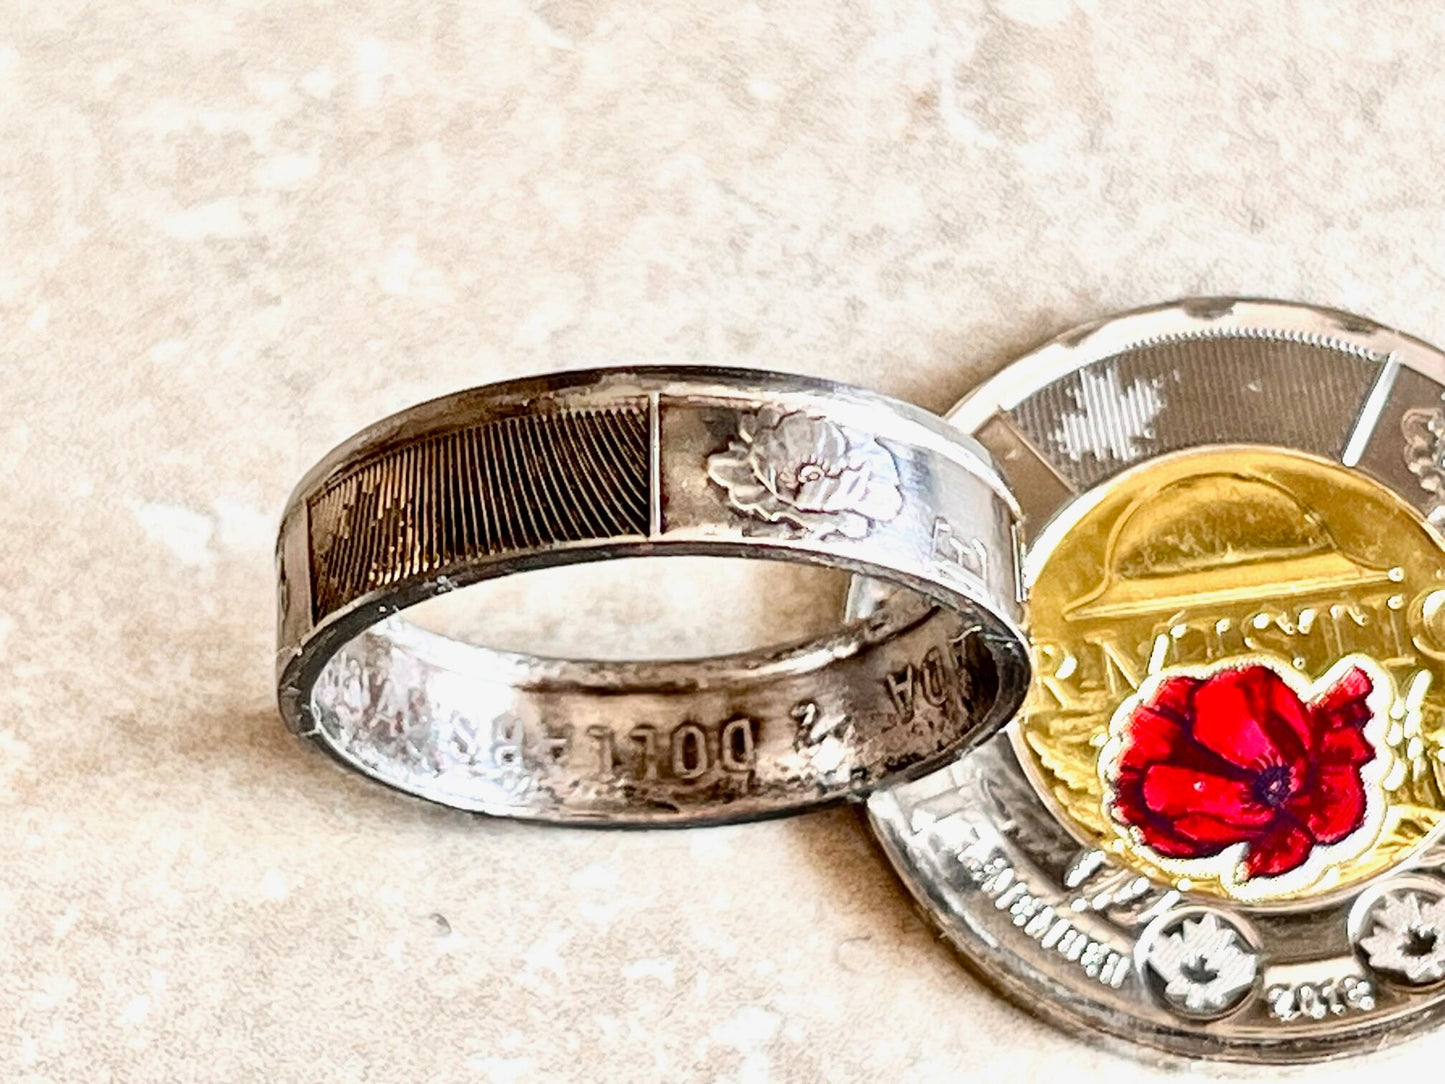 Armistice Canada Coin Ring World War One Handmade Personal Jewelry Ring Gift For Friend Coin Ring Gift For Him Her World Coin Collector